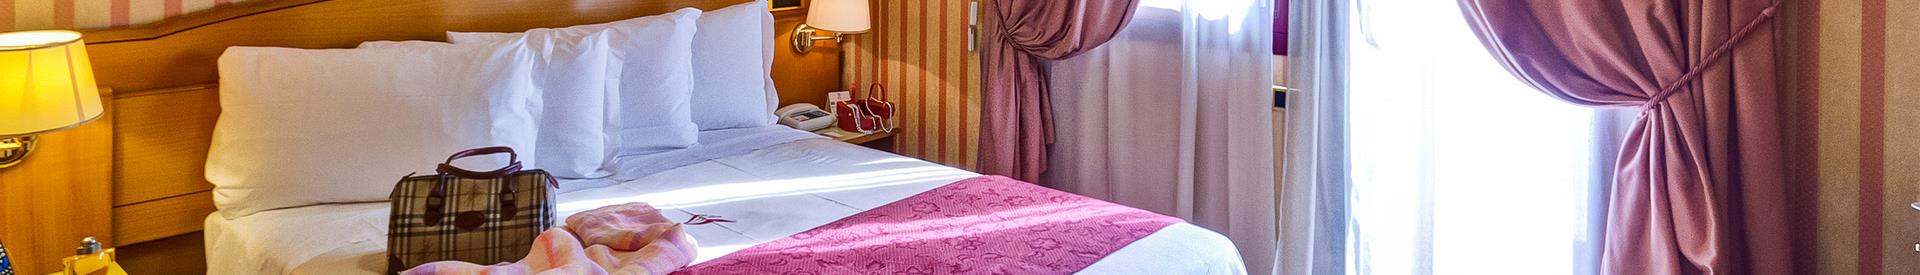  Looking for a hotel for your stay in Fiumicino (RM)? Book/reserve at the Best Western Hotel Rome Airport